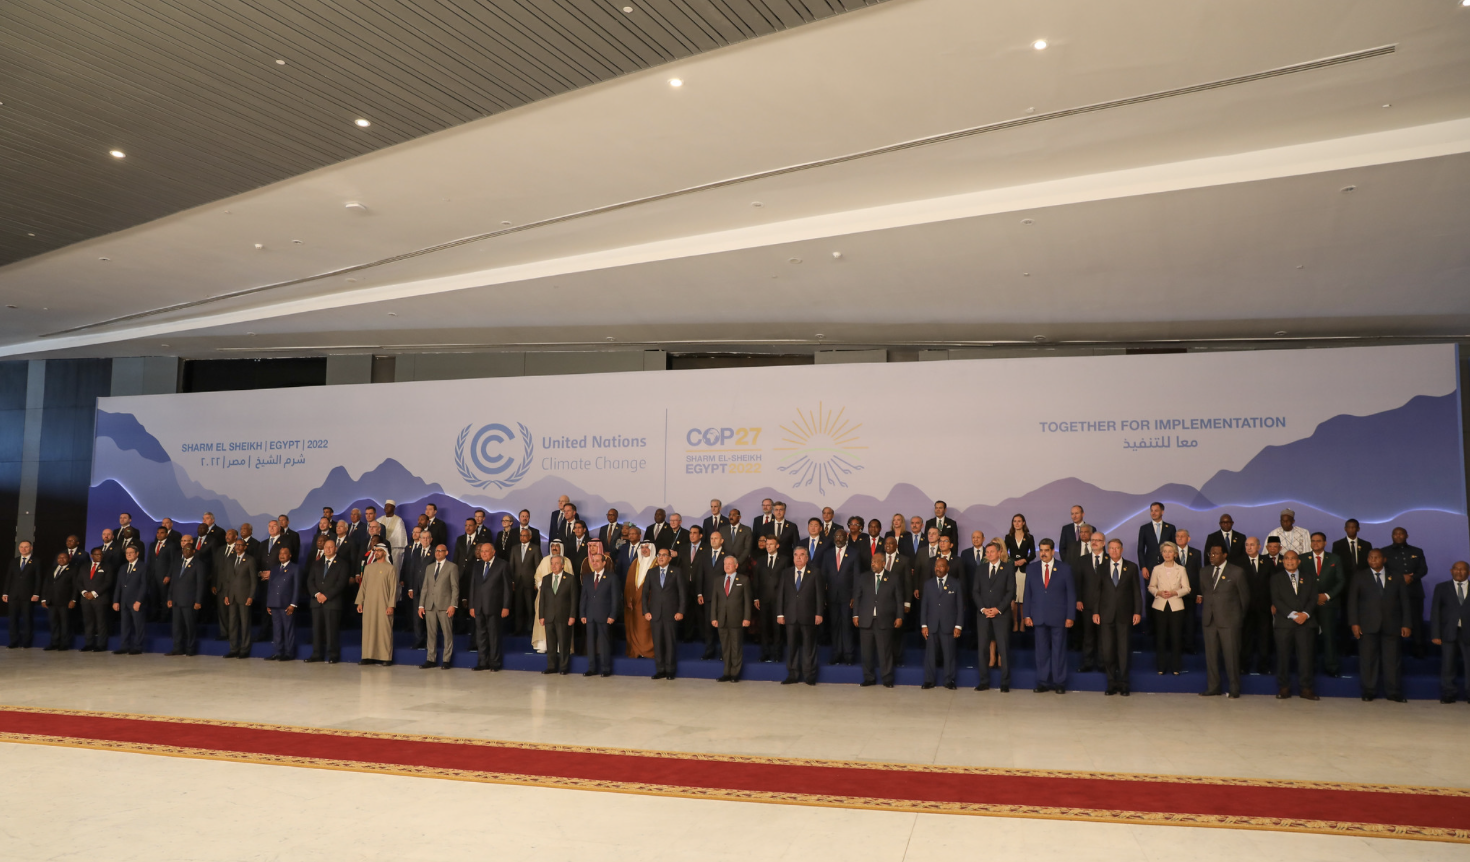 A notable absence of women at COP27. Image credit: <a href="https://www.flickr.com/photos/unfccc/52484457363/in/album-72177720303486605/">UN Climate Change, flickr</a>